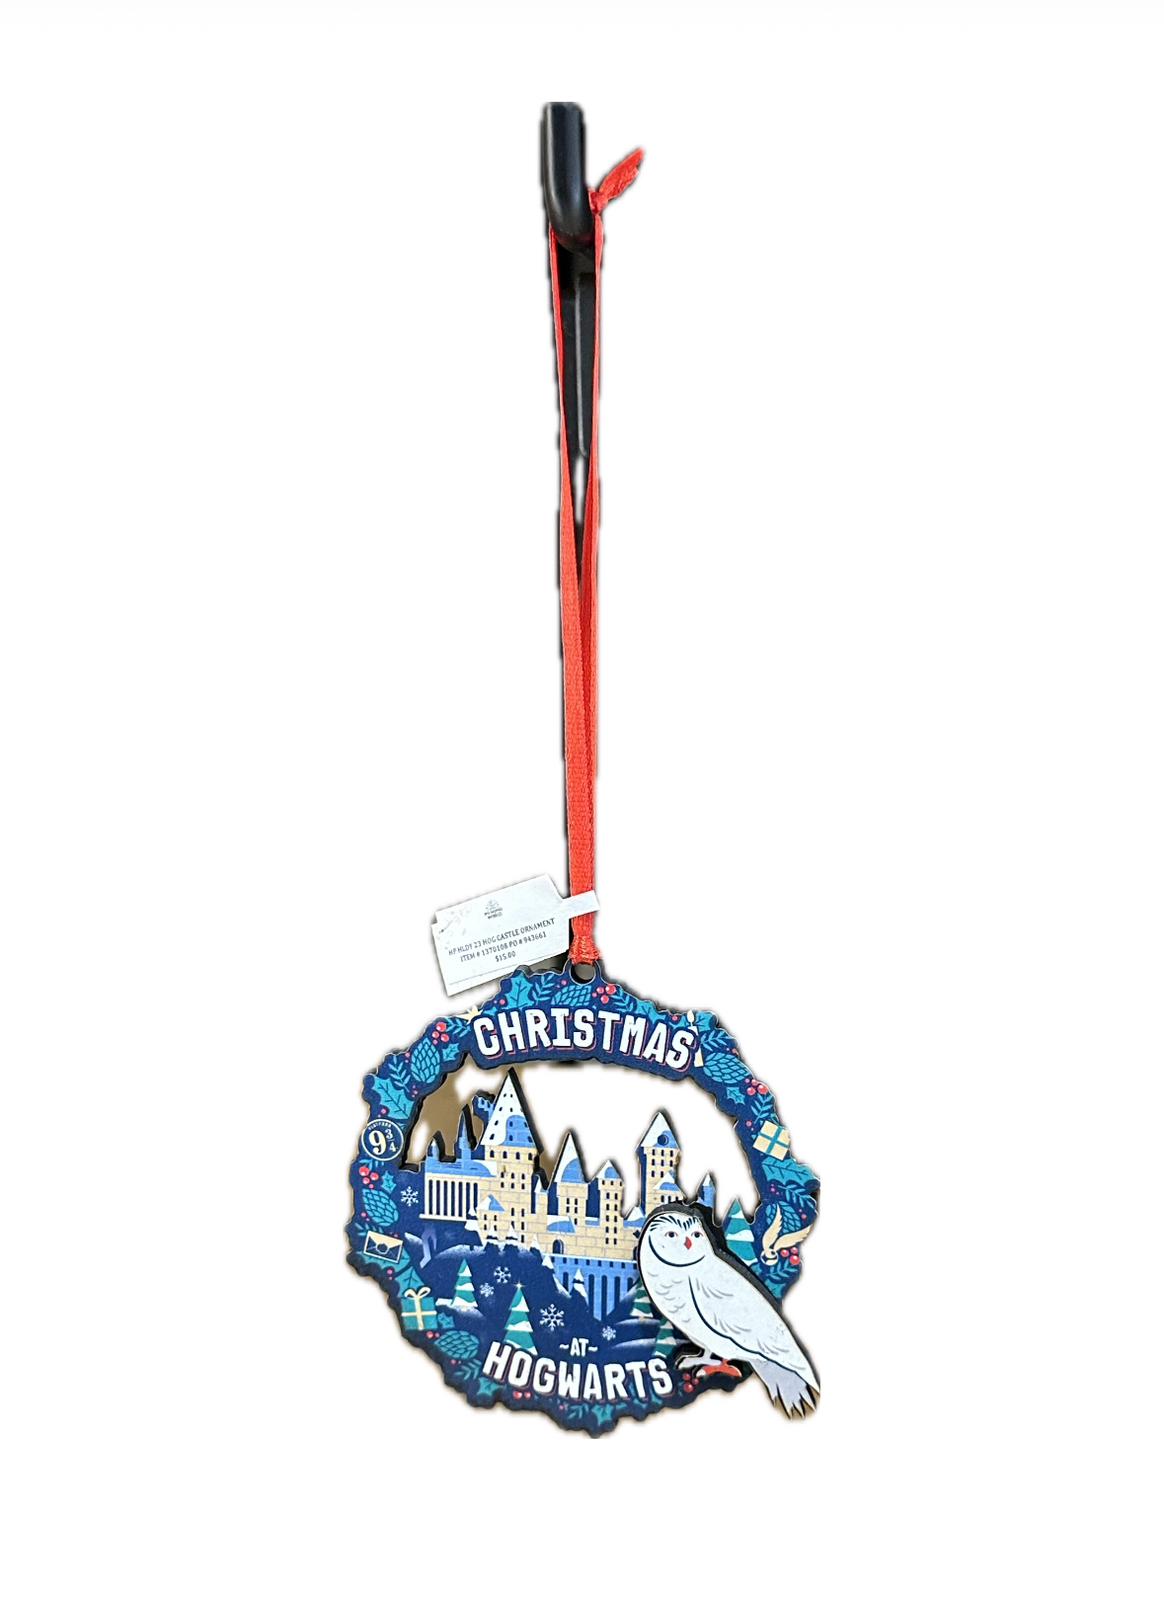 Universal Studios Harry Potter Hogwarts Hedwig Christmas Ornament New with Tag